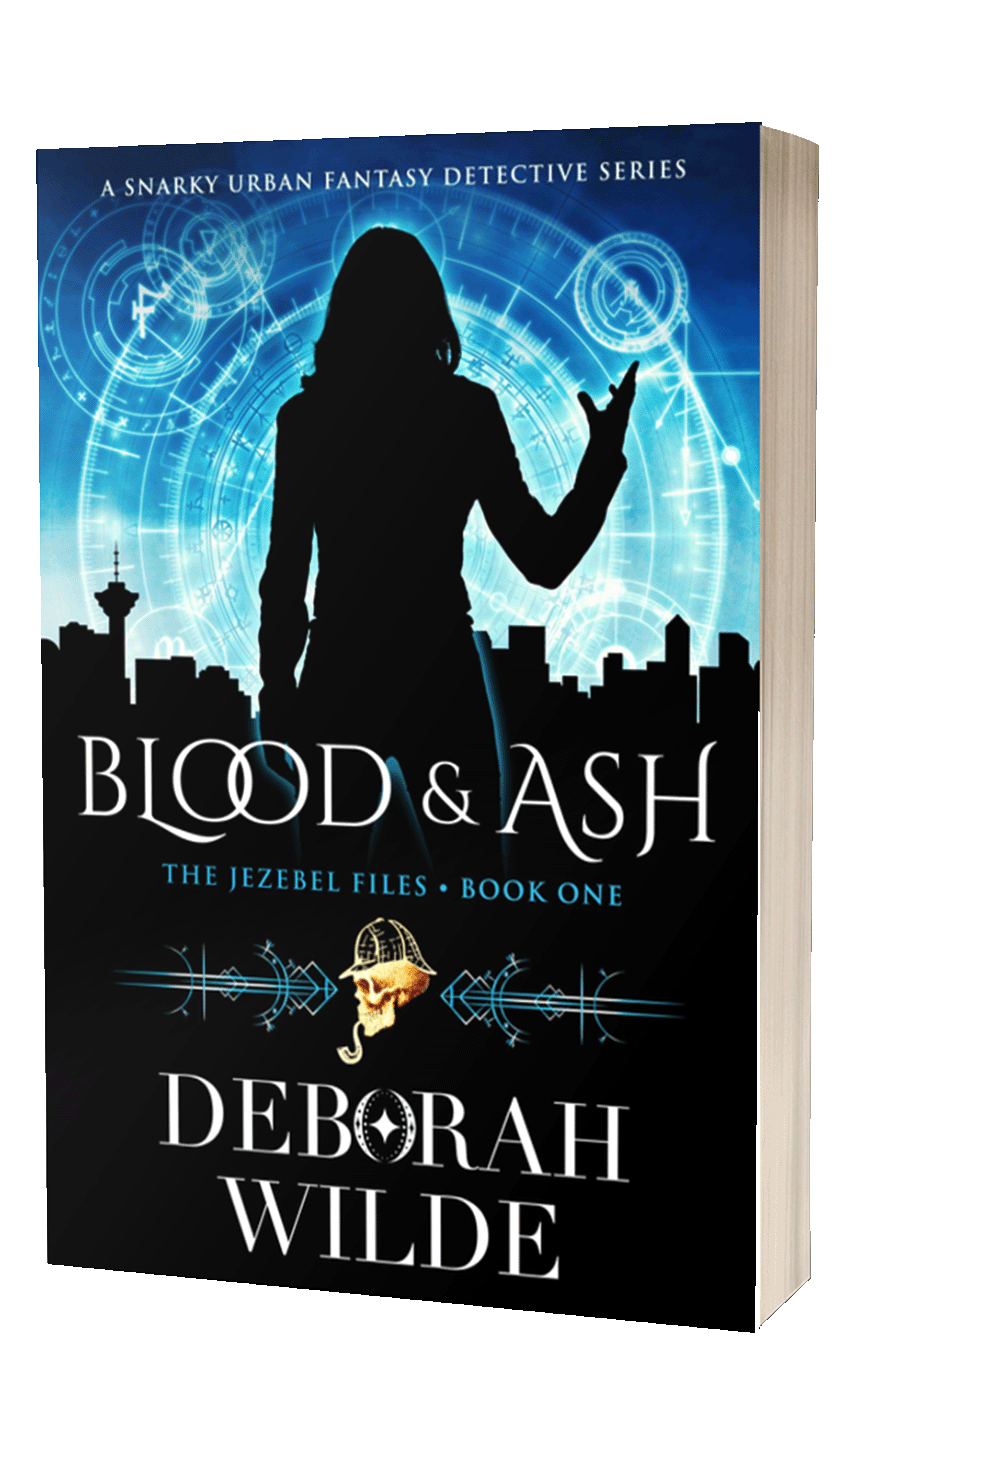 Paperback of Blood & Ash book 1 in The Jezebel Files, an urban fantasy detective fiction by Deborah Wilde.